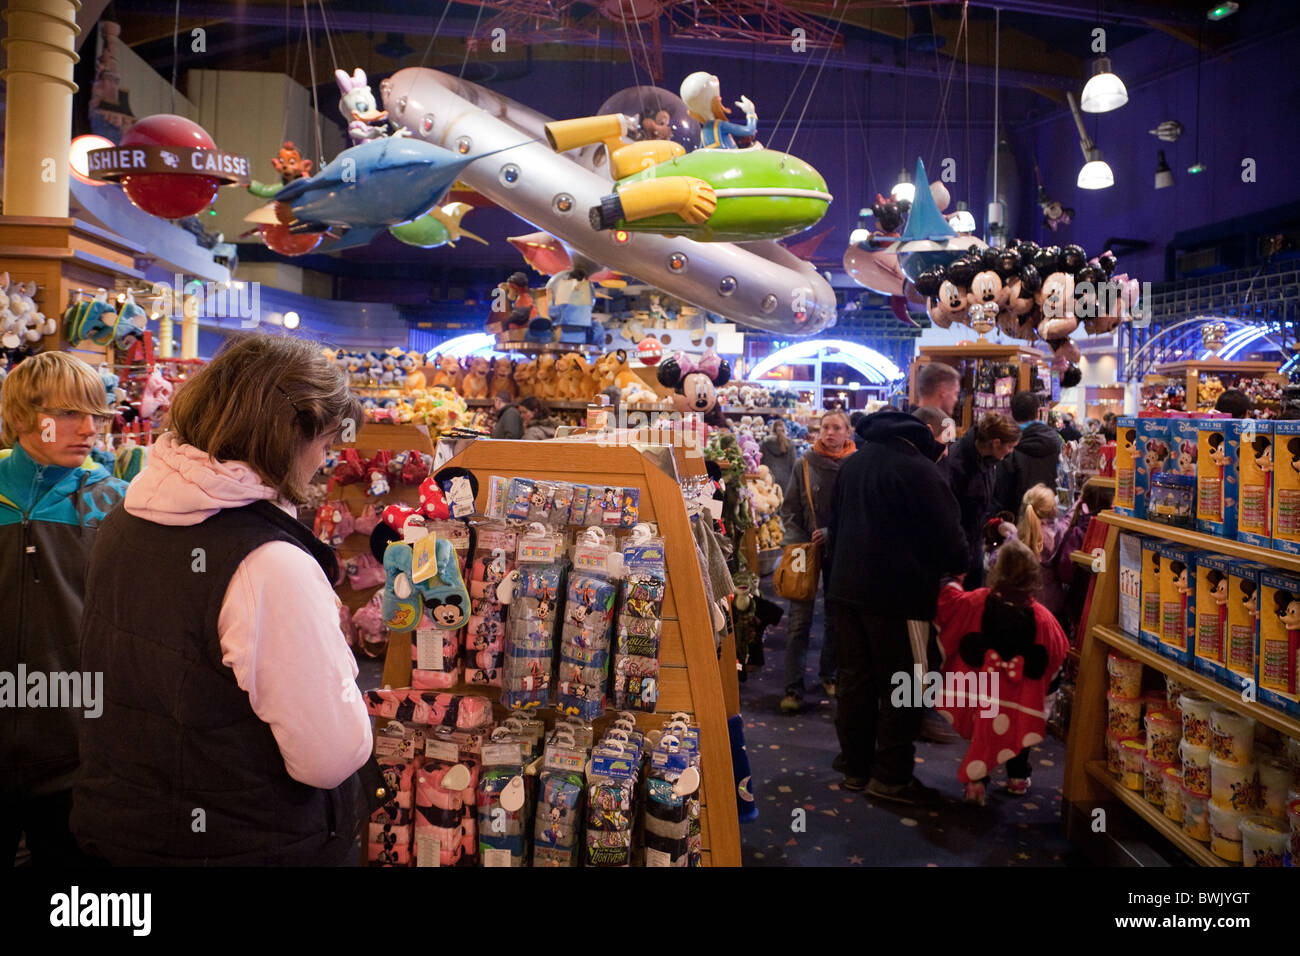 People shopping in the Disney Store, the Village, Disneyland Paris, France Stock Photo